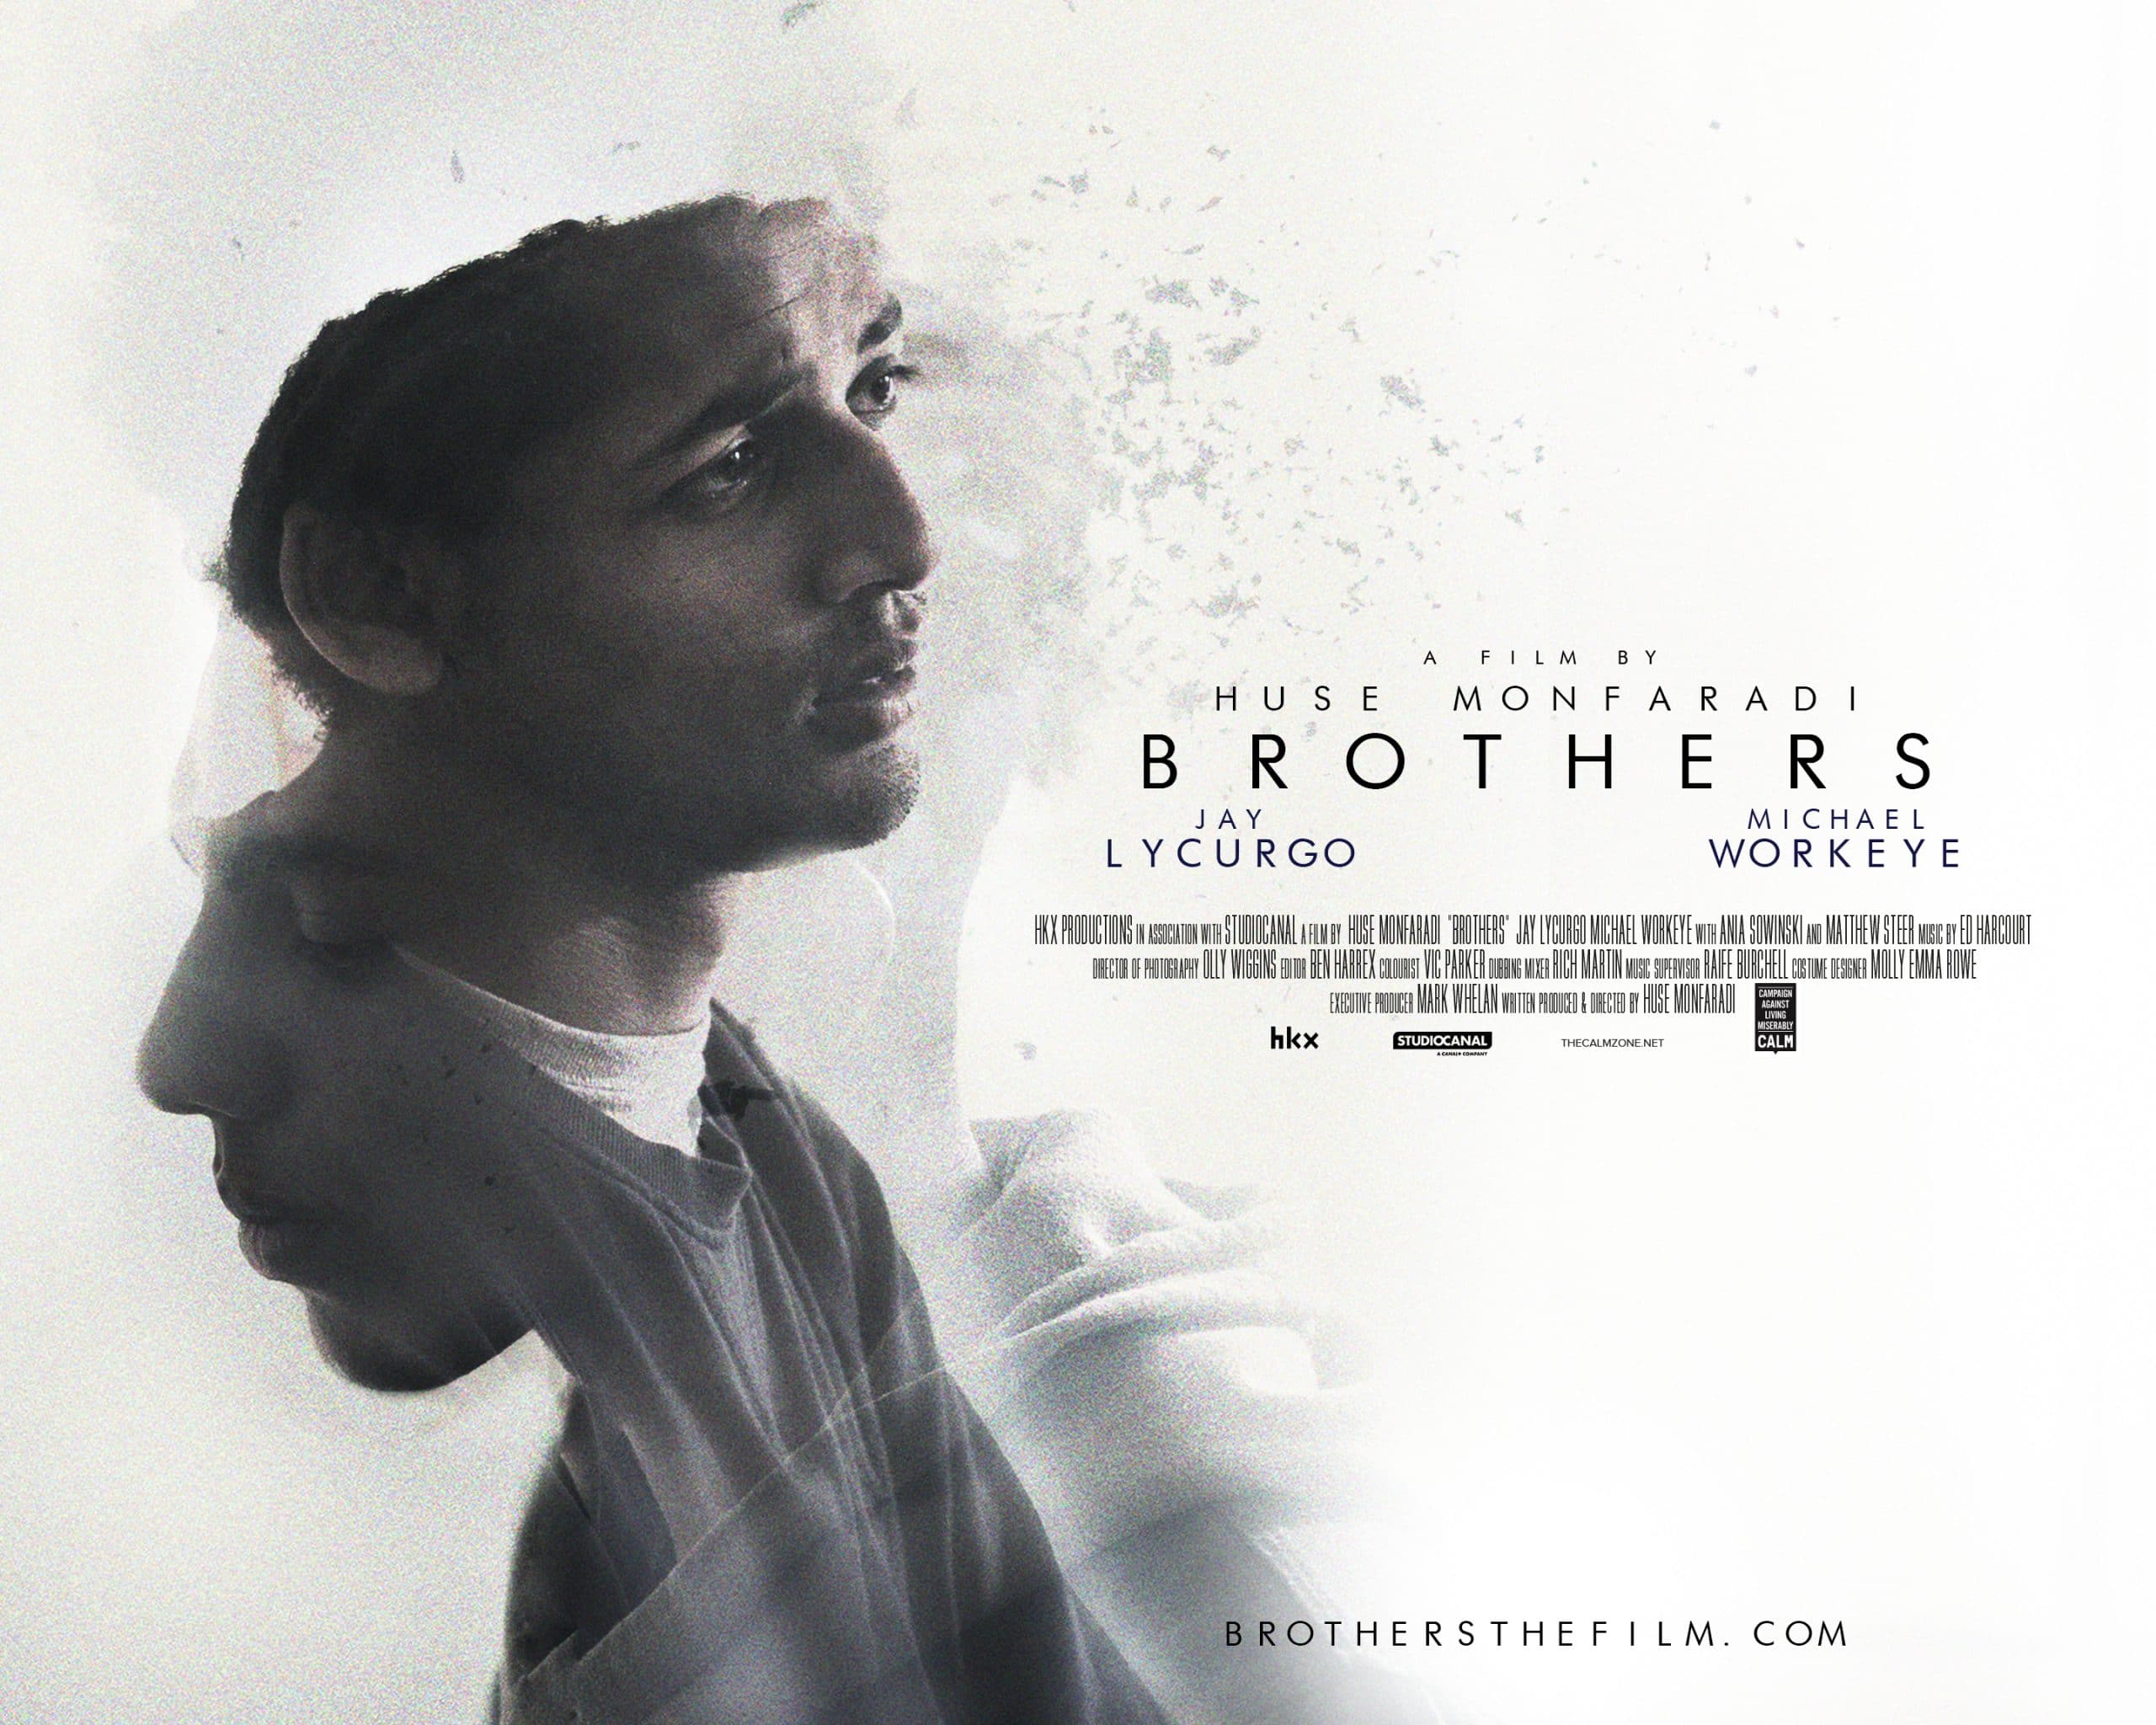 Brothers, Feature Film, Biography, Drama, Film based on literary